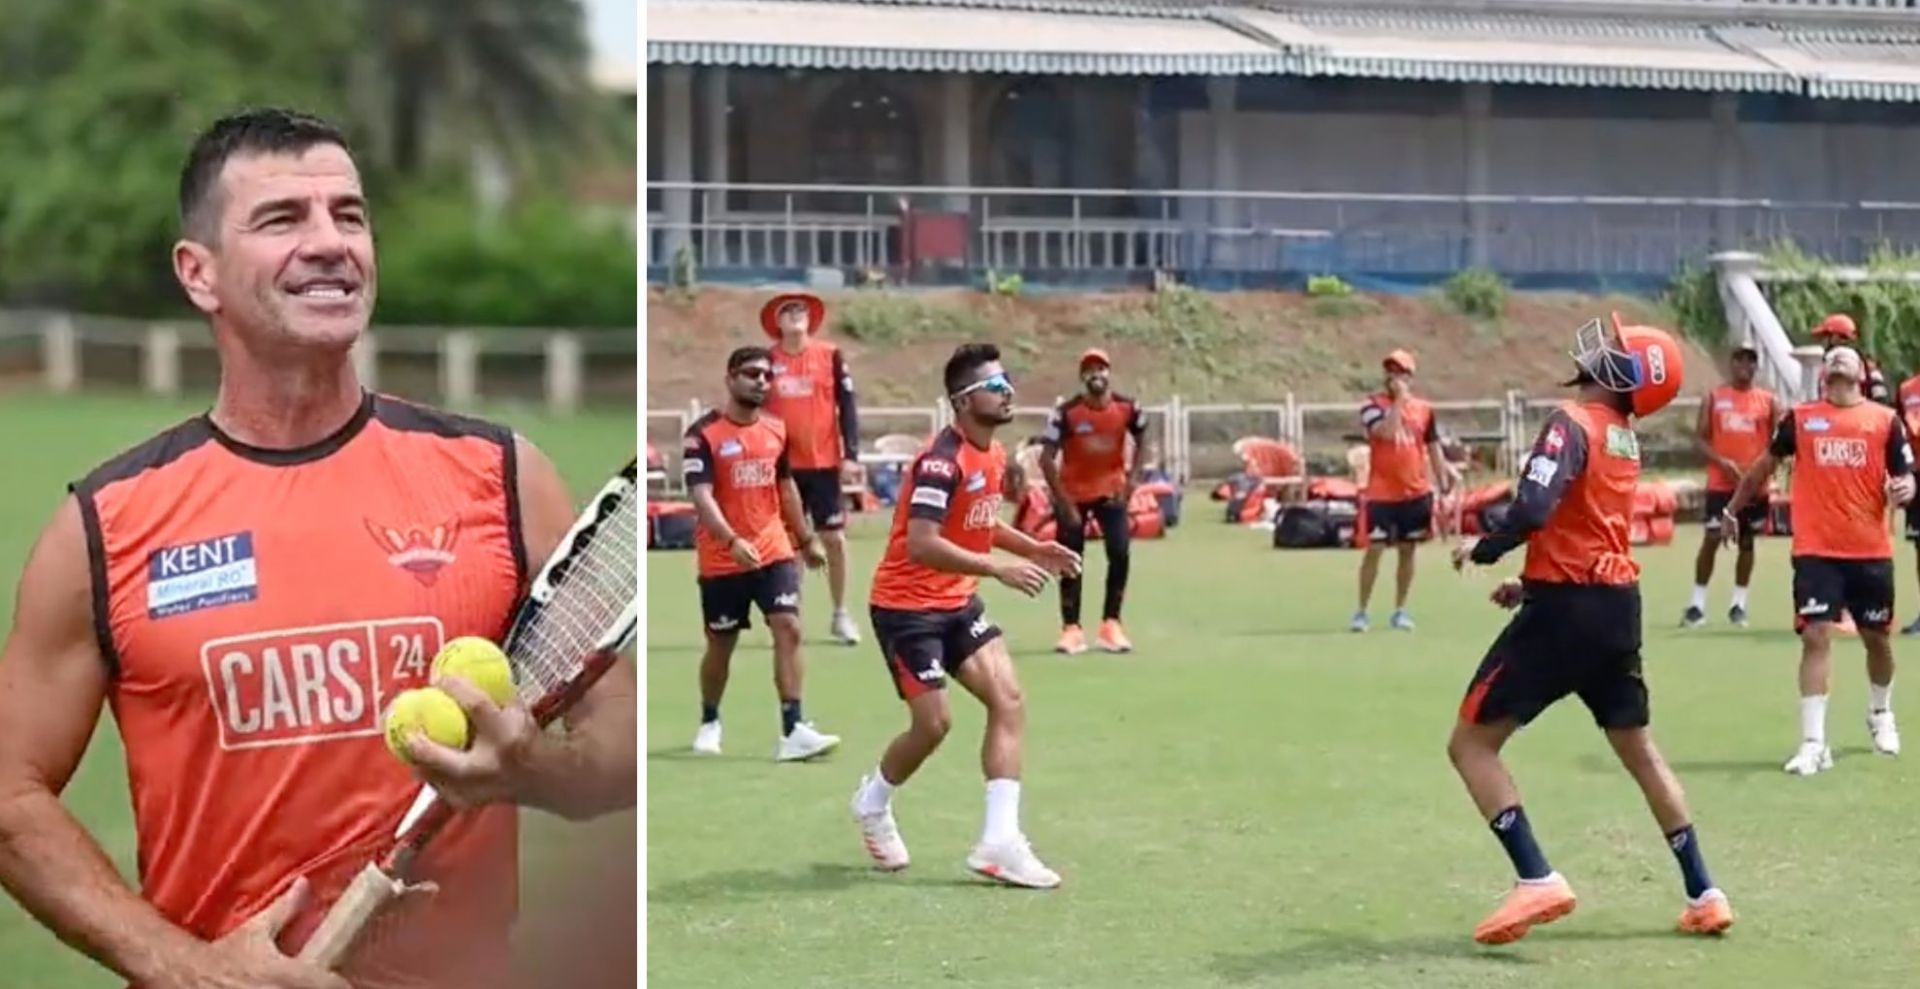 SRH cricketers engage in a hilarious helmet-ball game (Credit: Twitter/Sunrisers Hyderabad)